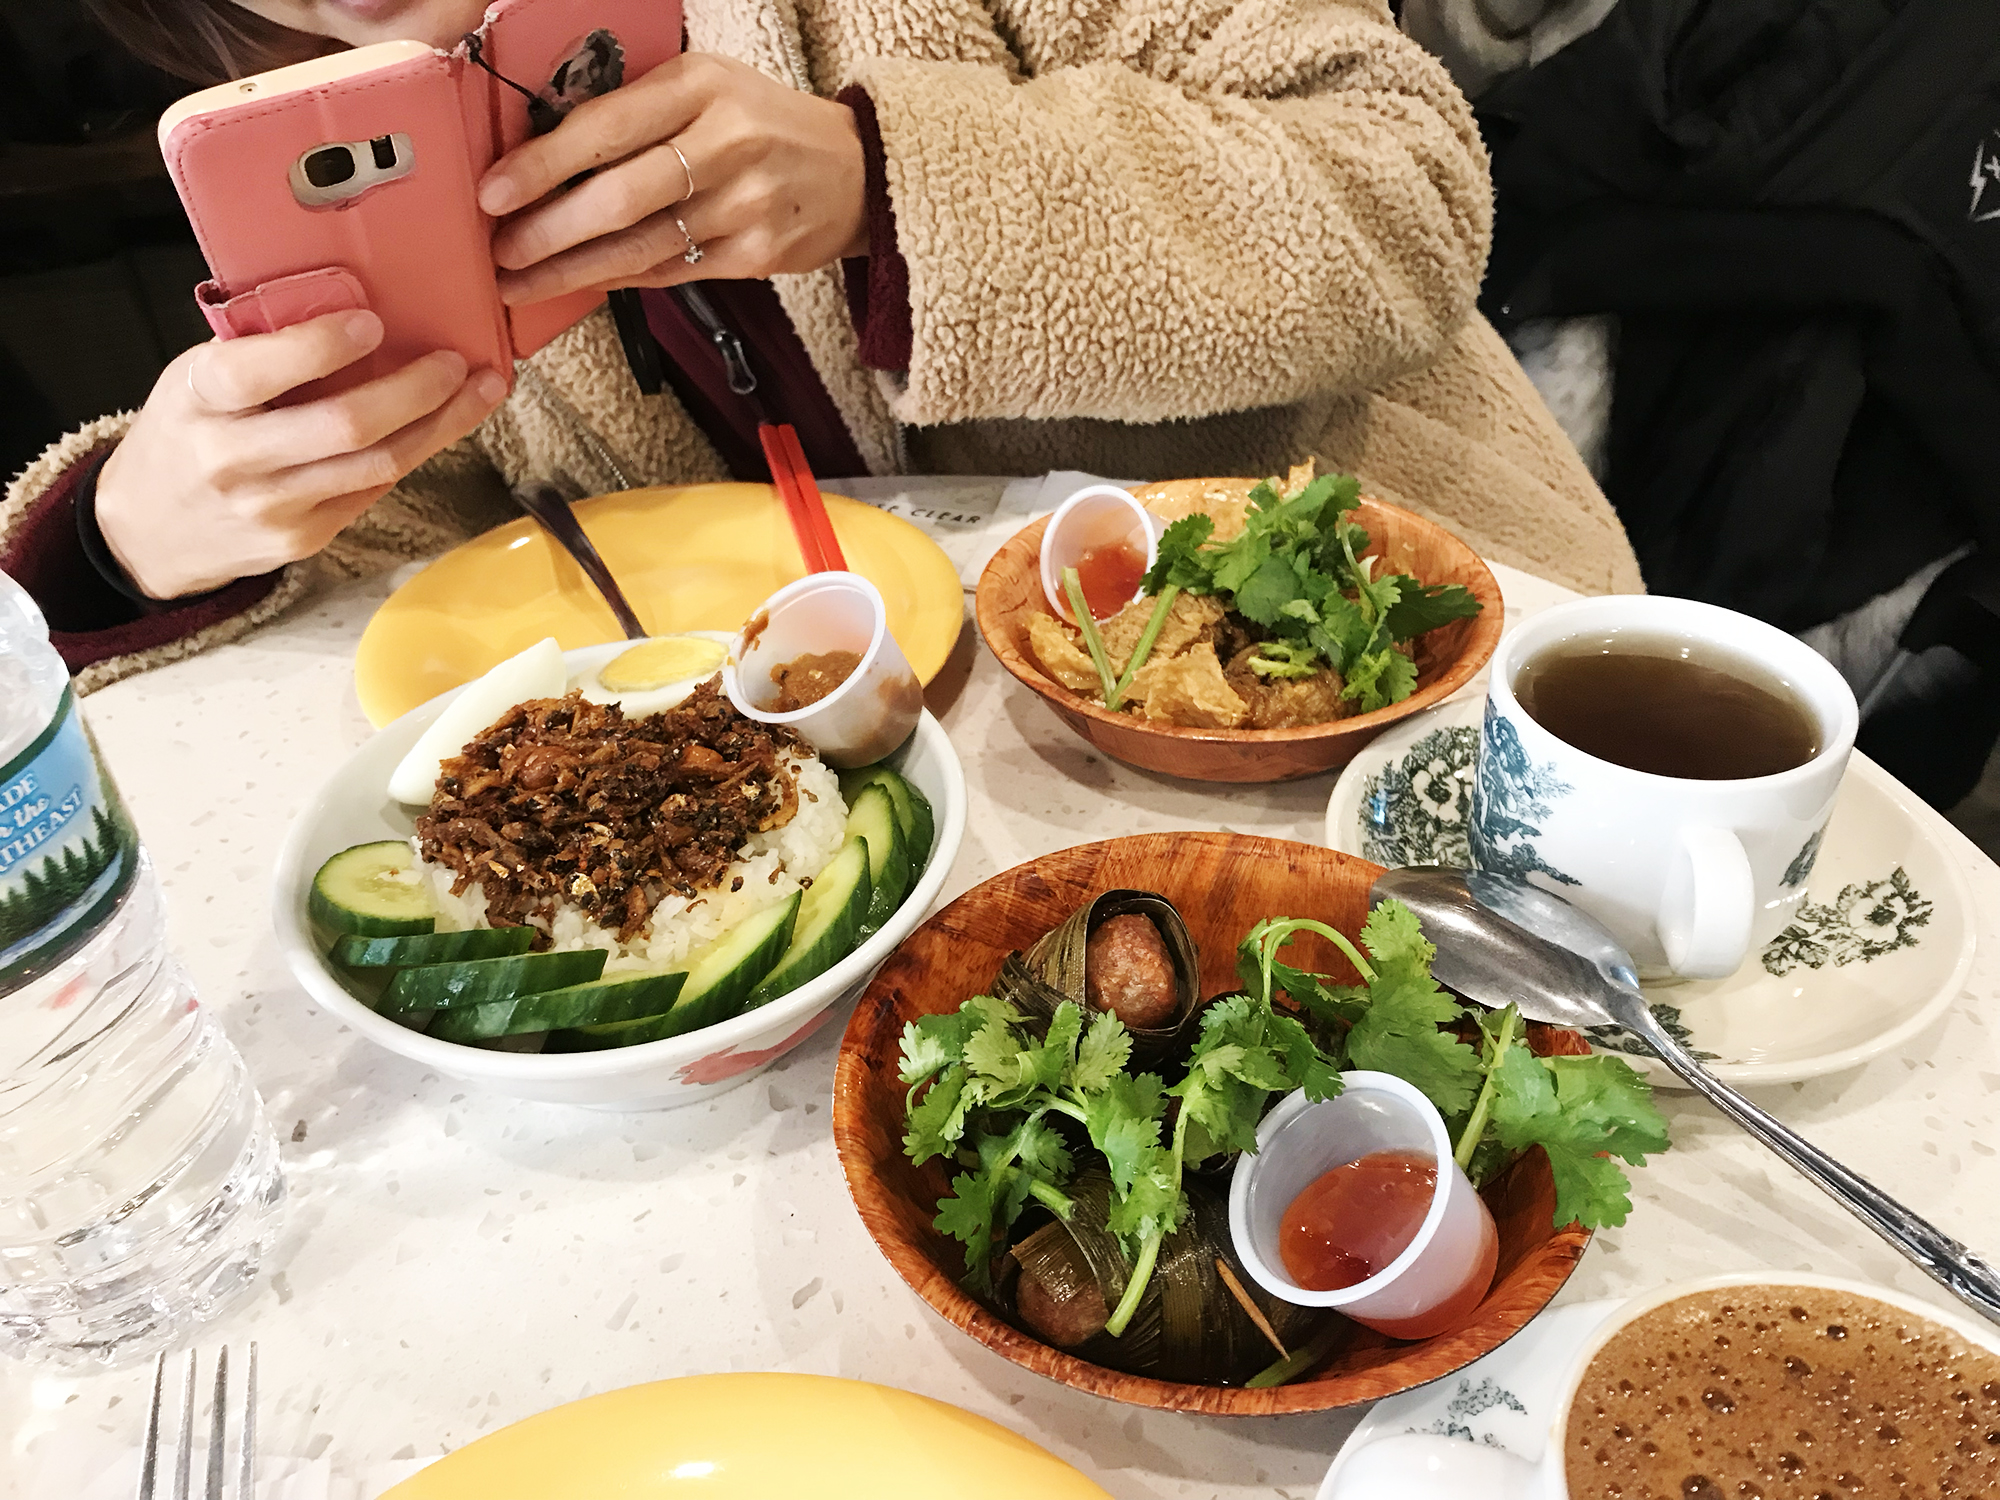 NYC: Kopitiam - A Malaysian Cafe in the Lower East Side